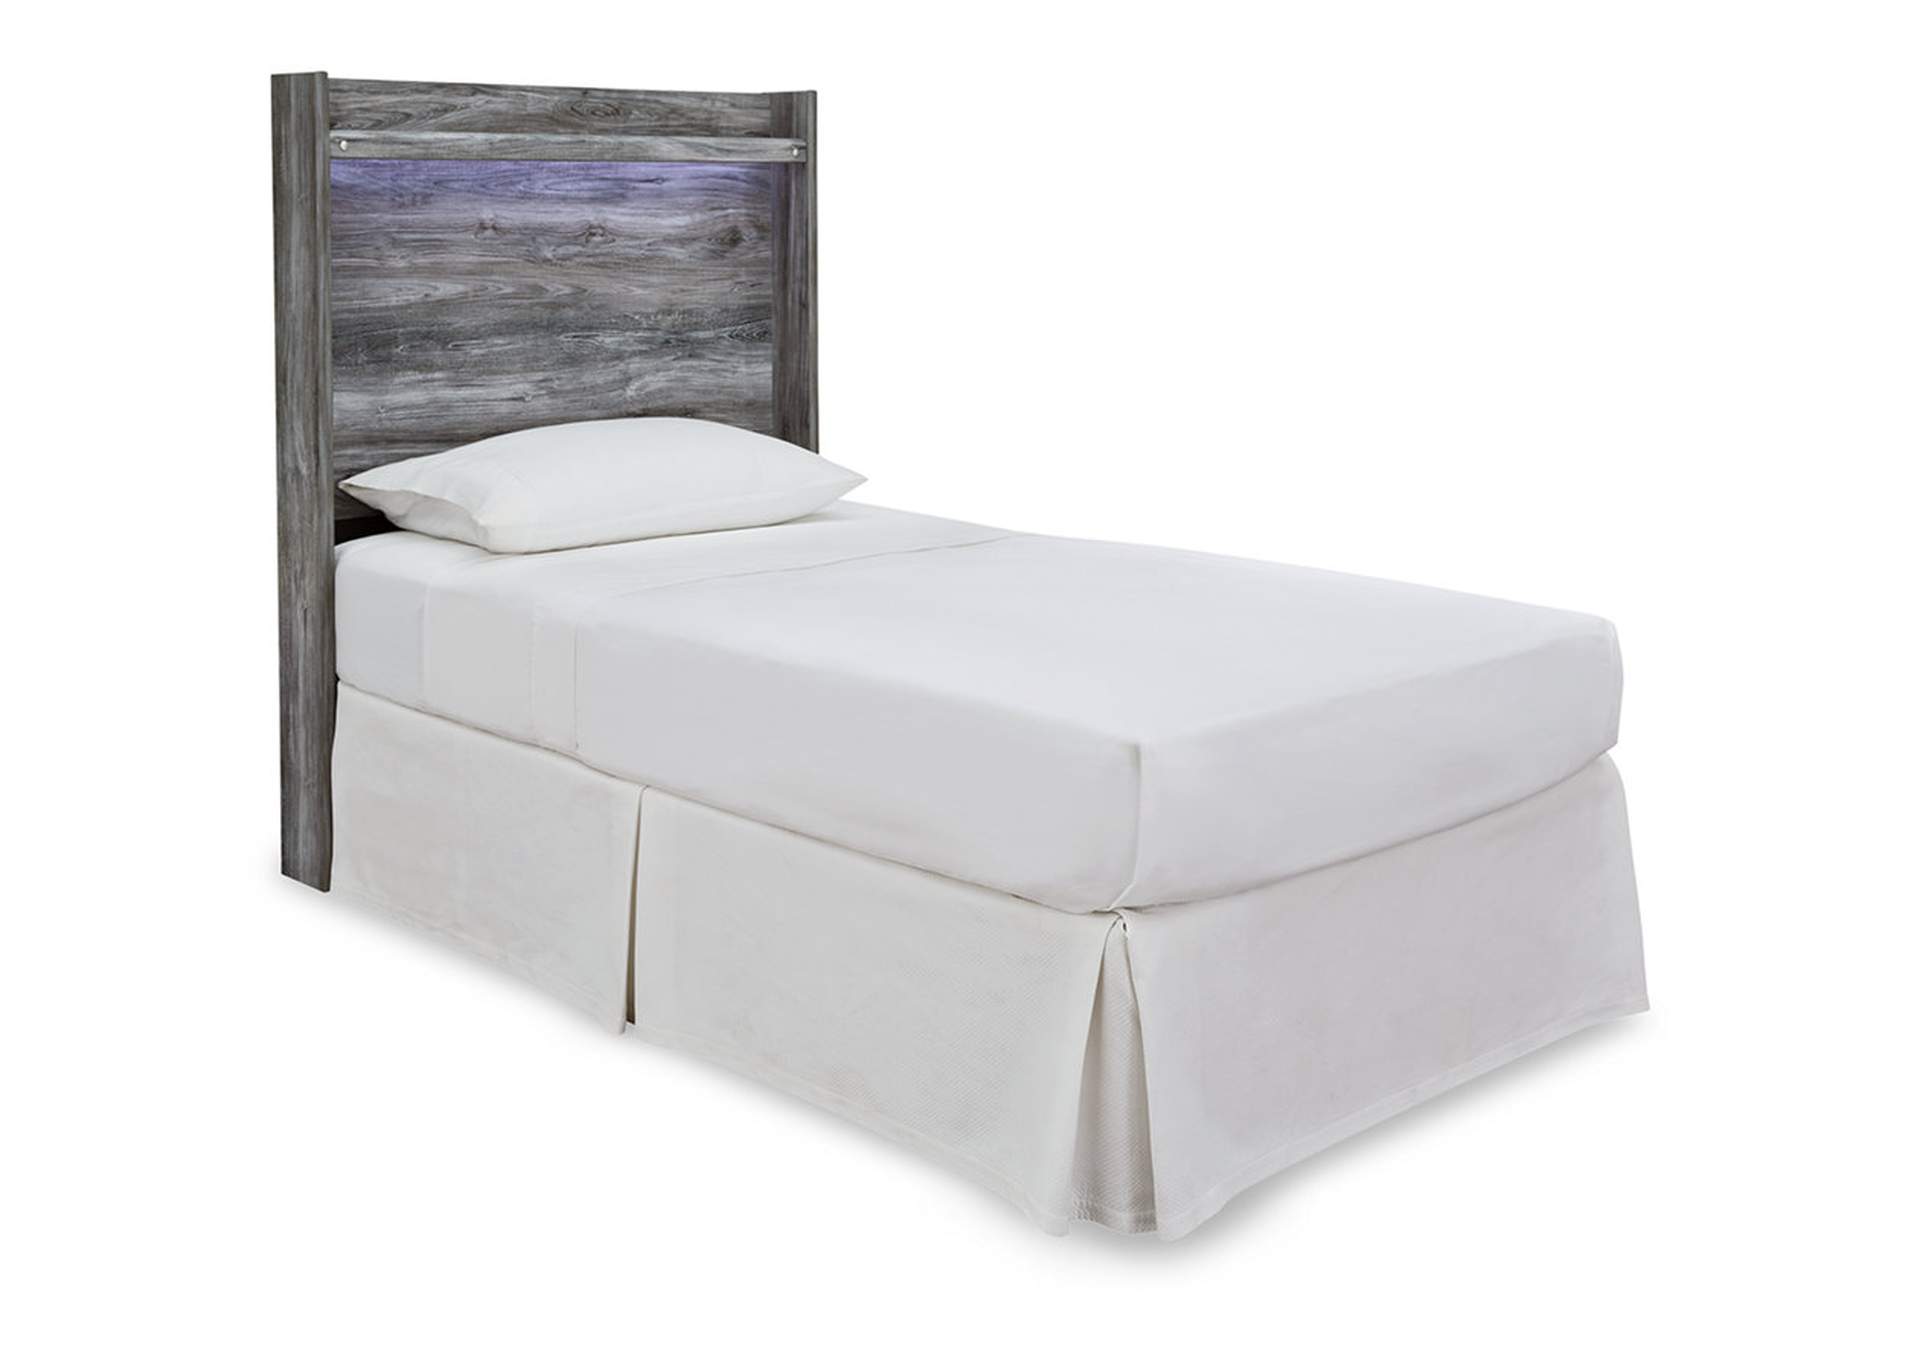 Baystorm Twin Panel Bed, Dresser, Mirror and Nightstand,Signature Design By Ashley